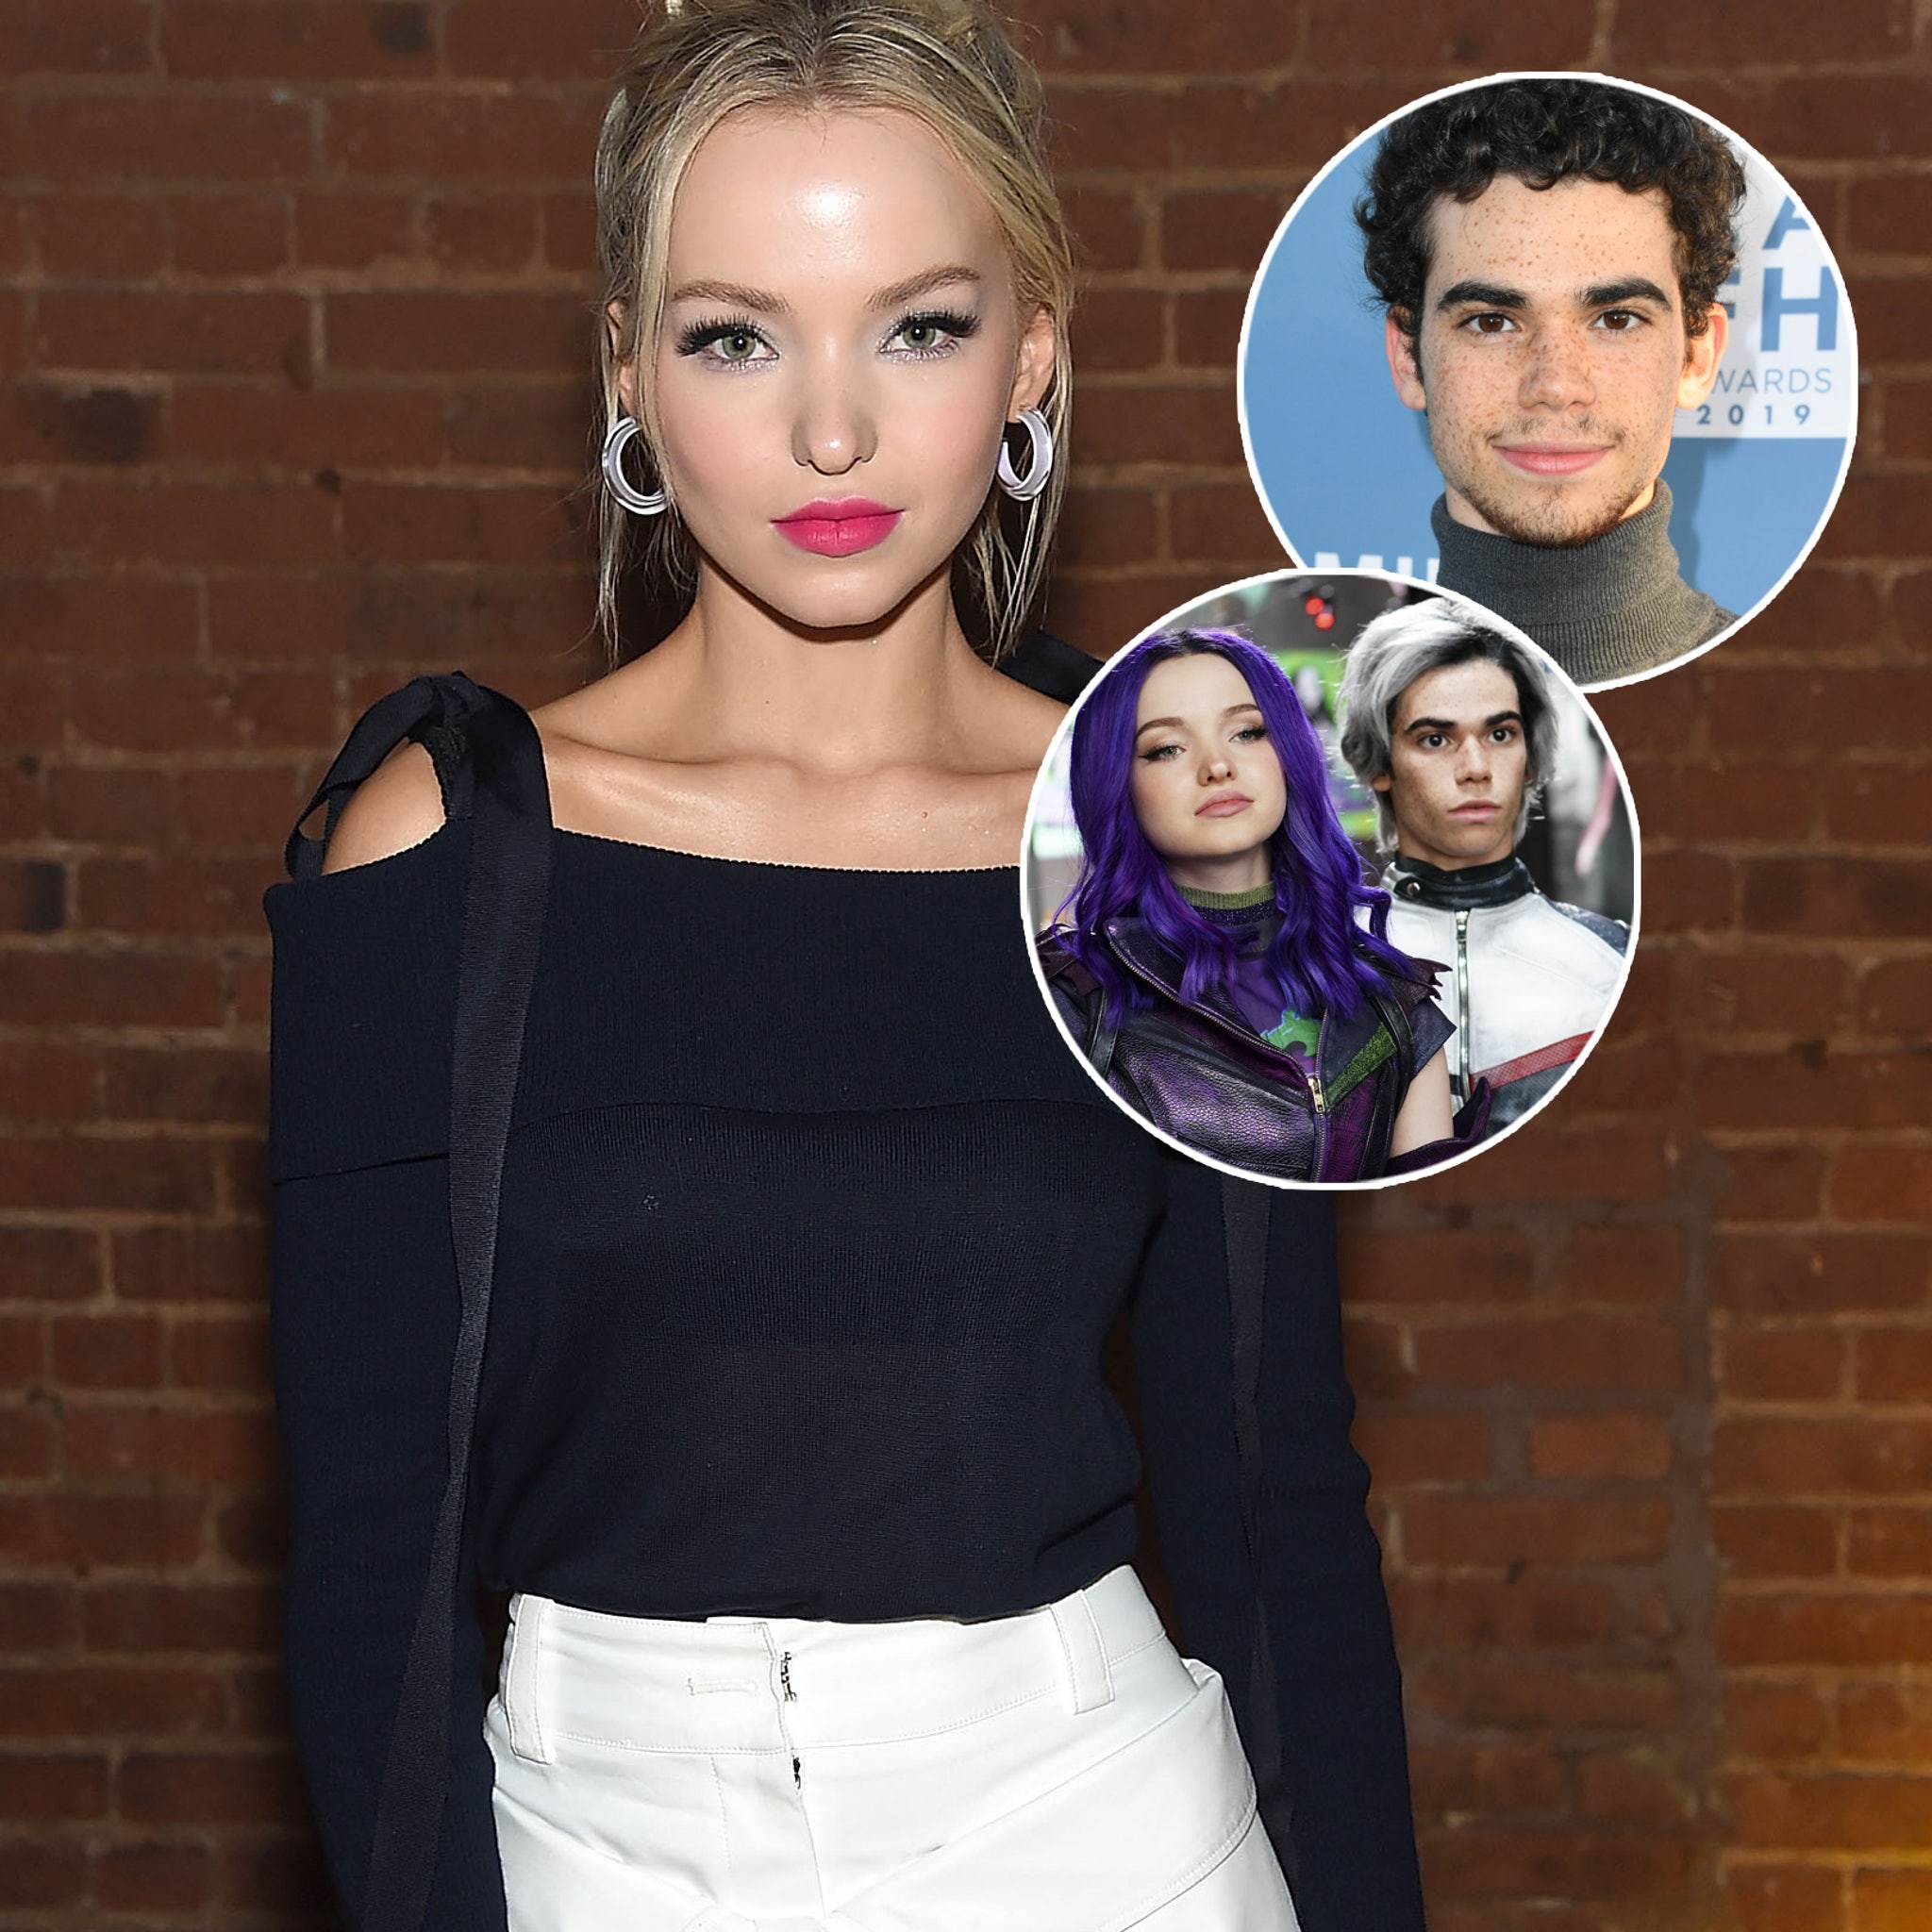 Welcome To Dove Cameron's Intimate New Musical World: How The